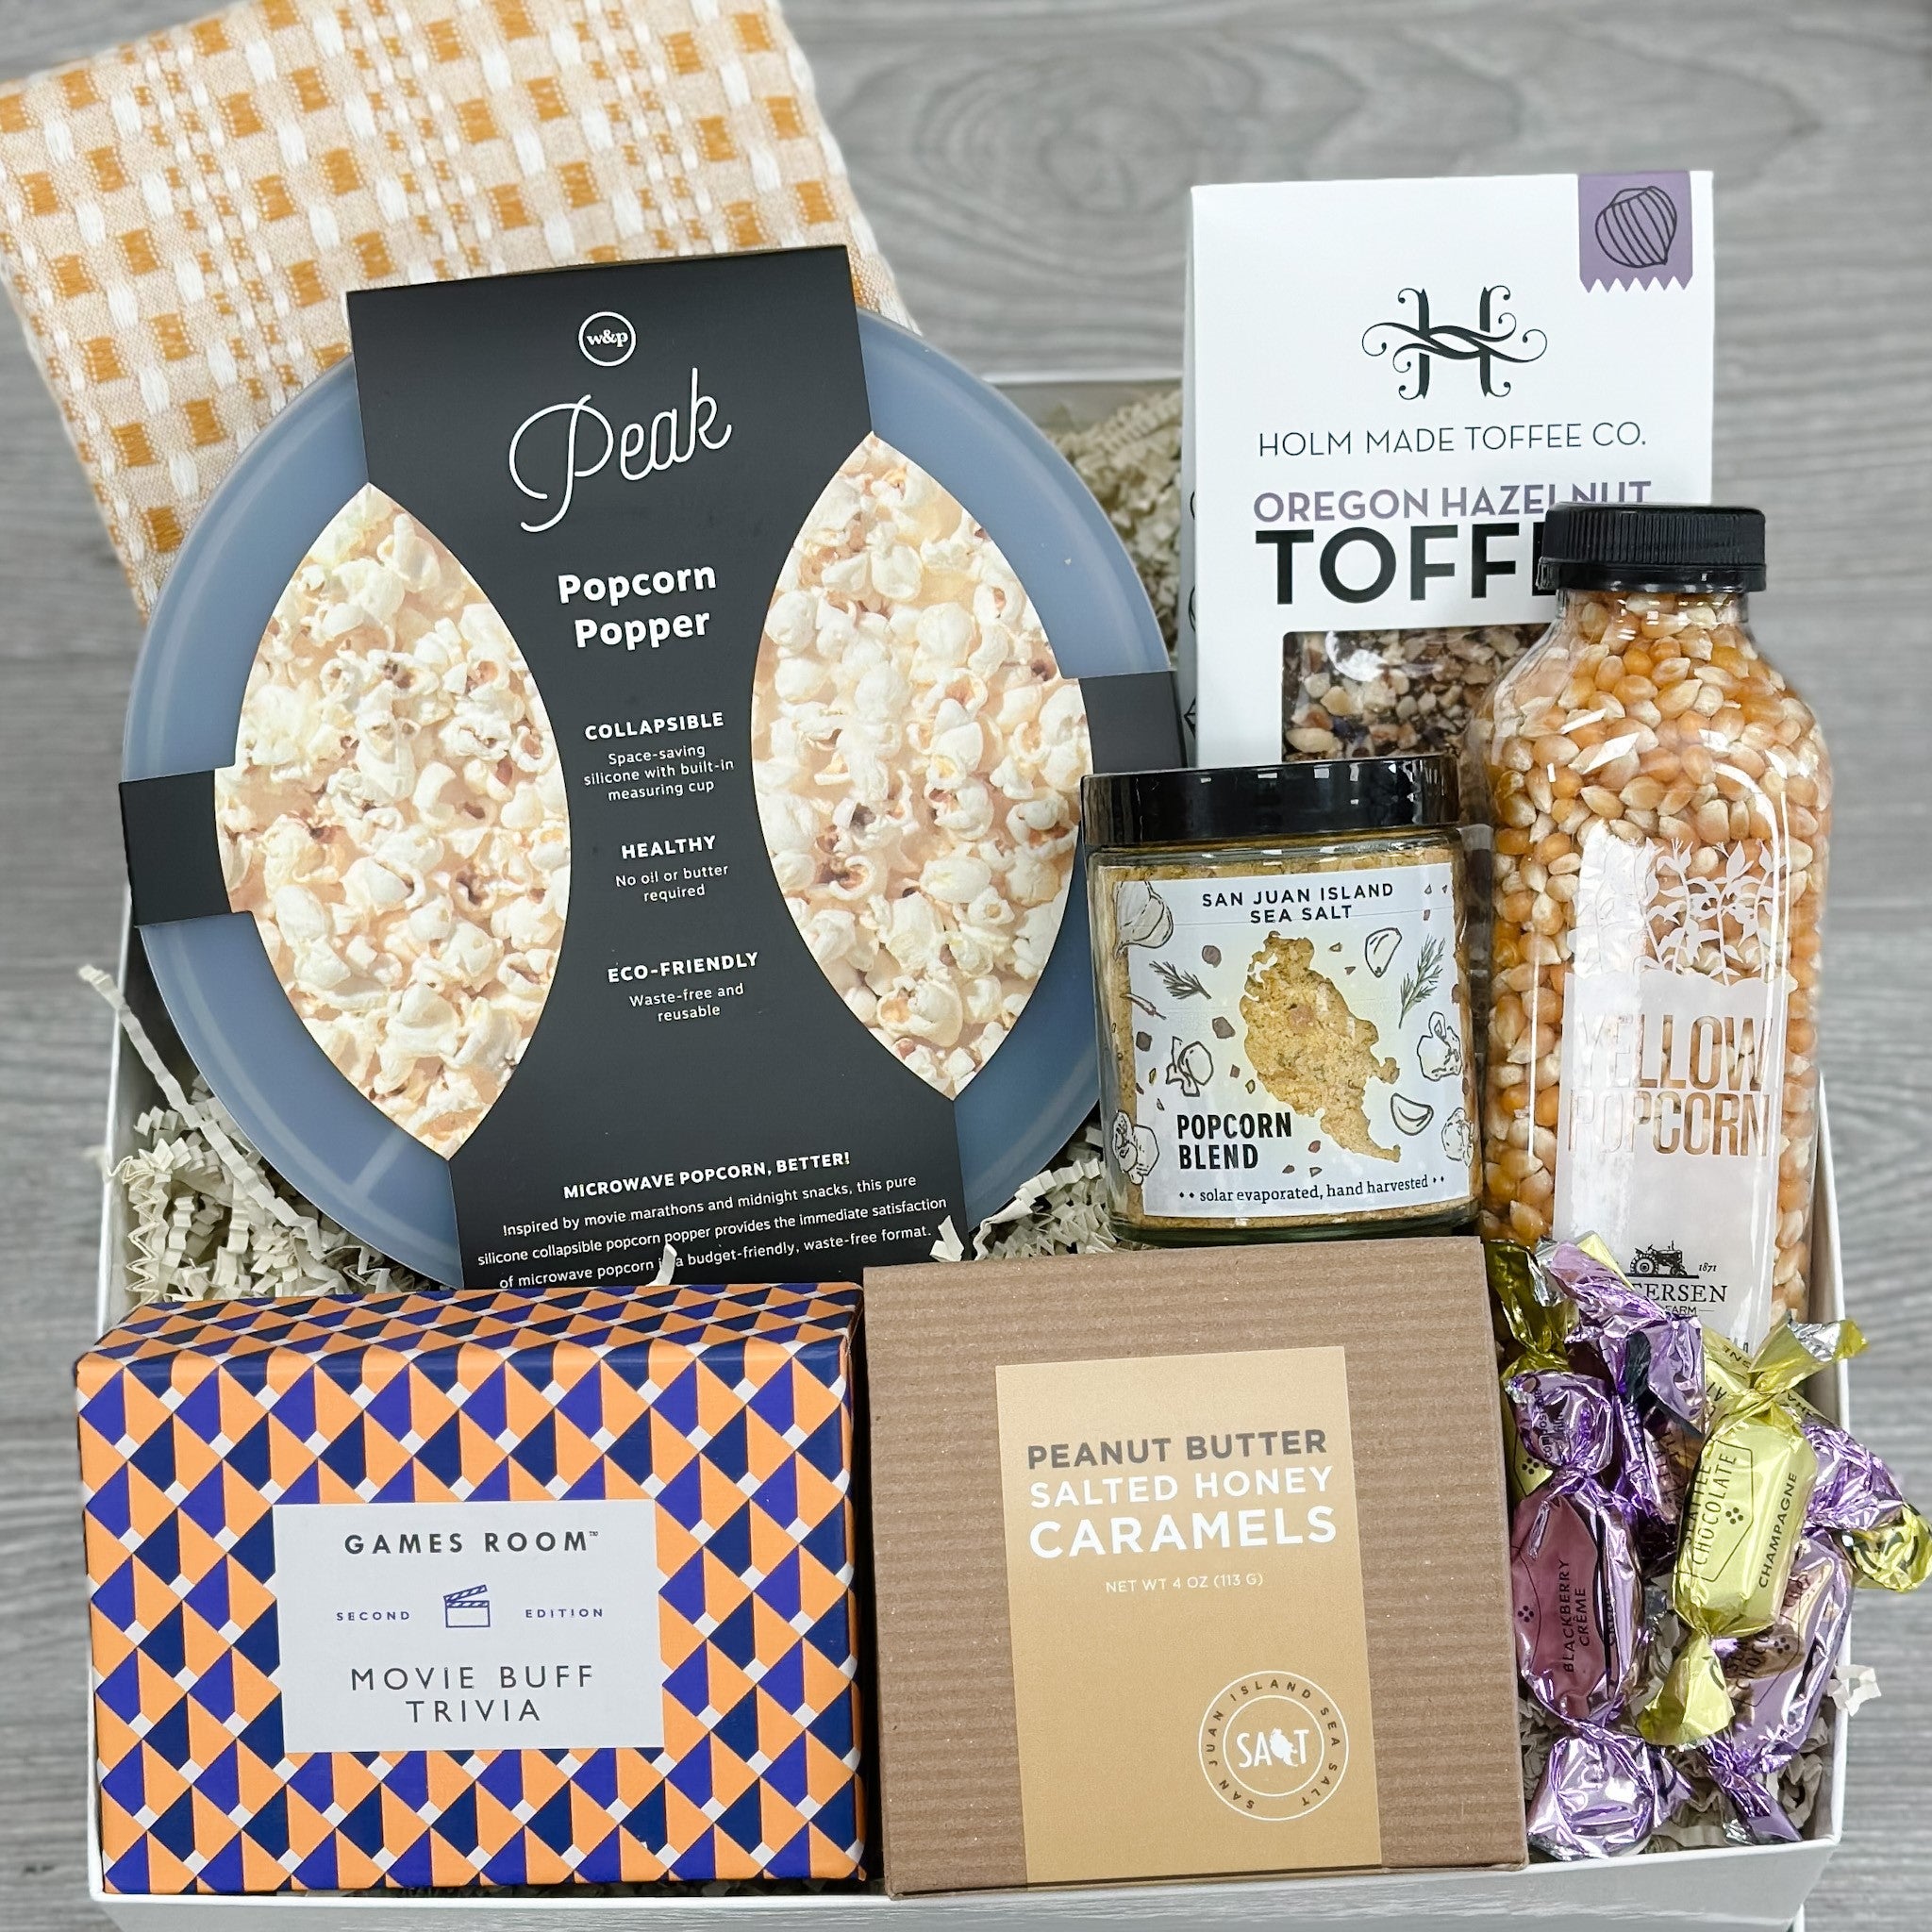 popcorn popper, popcorn kernels, popcorn seasoning salt, toffee, caramel, game, chocolate, dish towel all included in our movie night gift basket